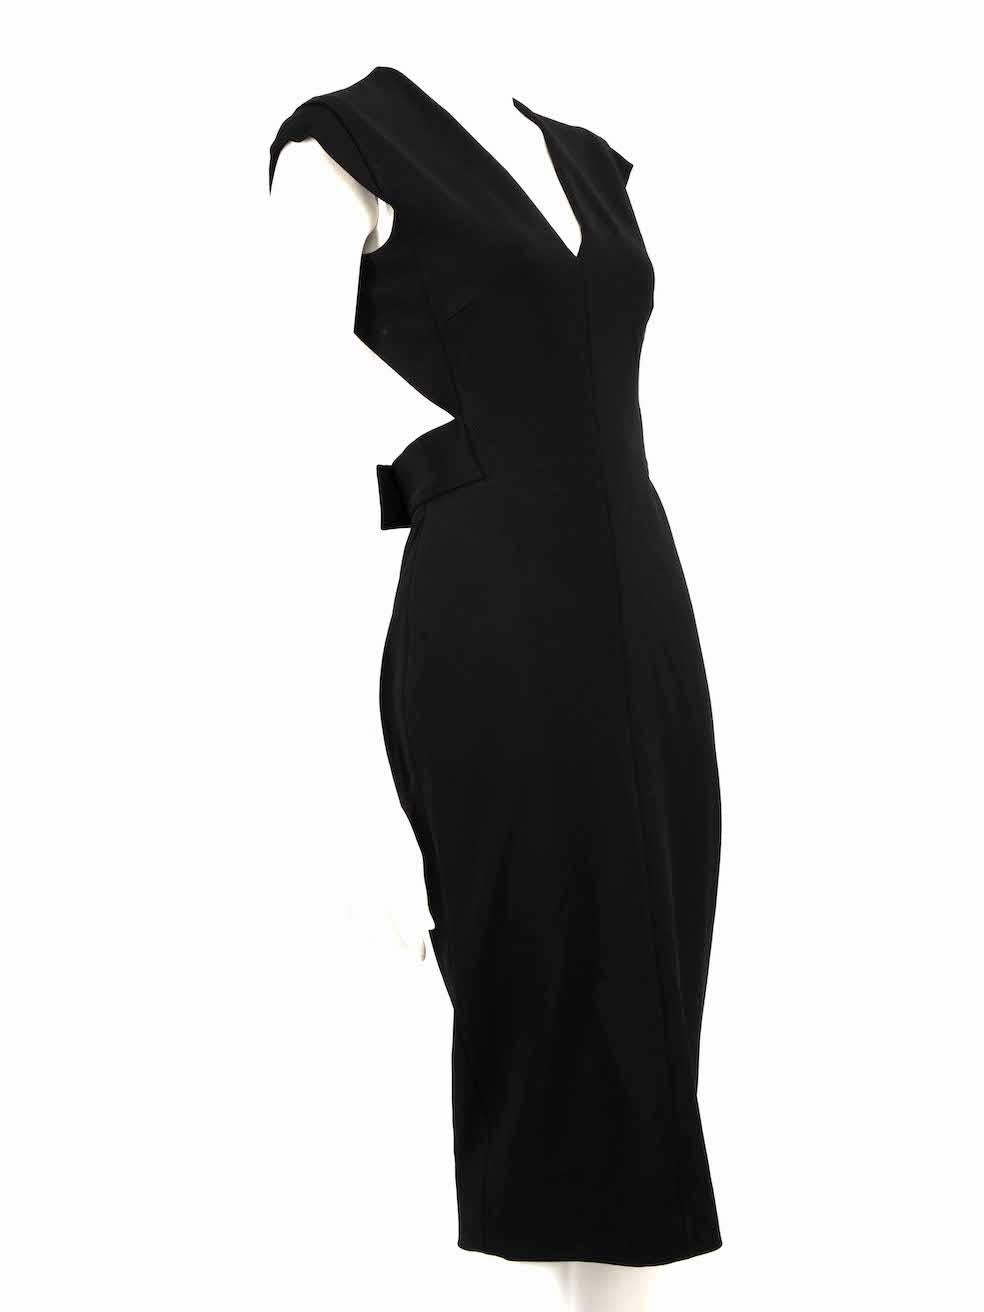 CONDITION is Very good. Hardly any visible wear to dress is evident on this used Victoria Beckham designer resale item.
 
 
 
 Details
 
 
 Black
 
 Viscose
 
 Midi bodycon dress
 
 V neckline
 
 Open back
 
 Back zip closure with buttons
 
 
 
 
 
